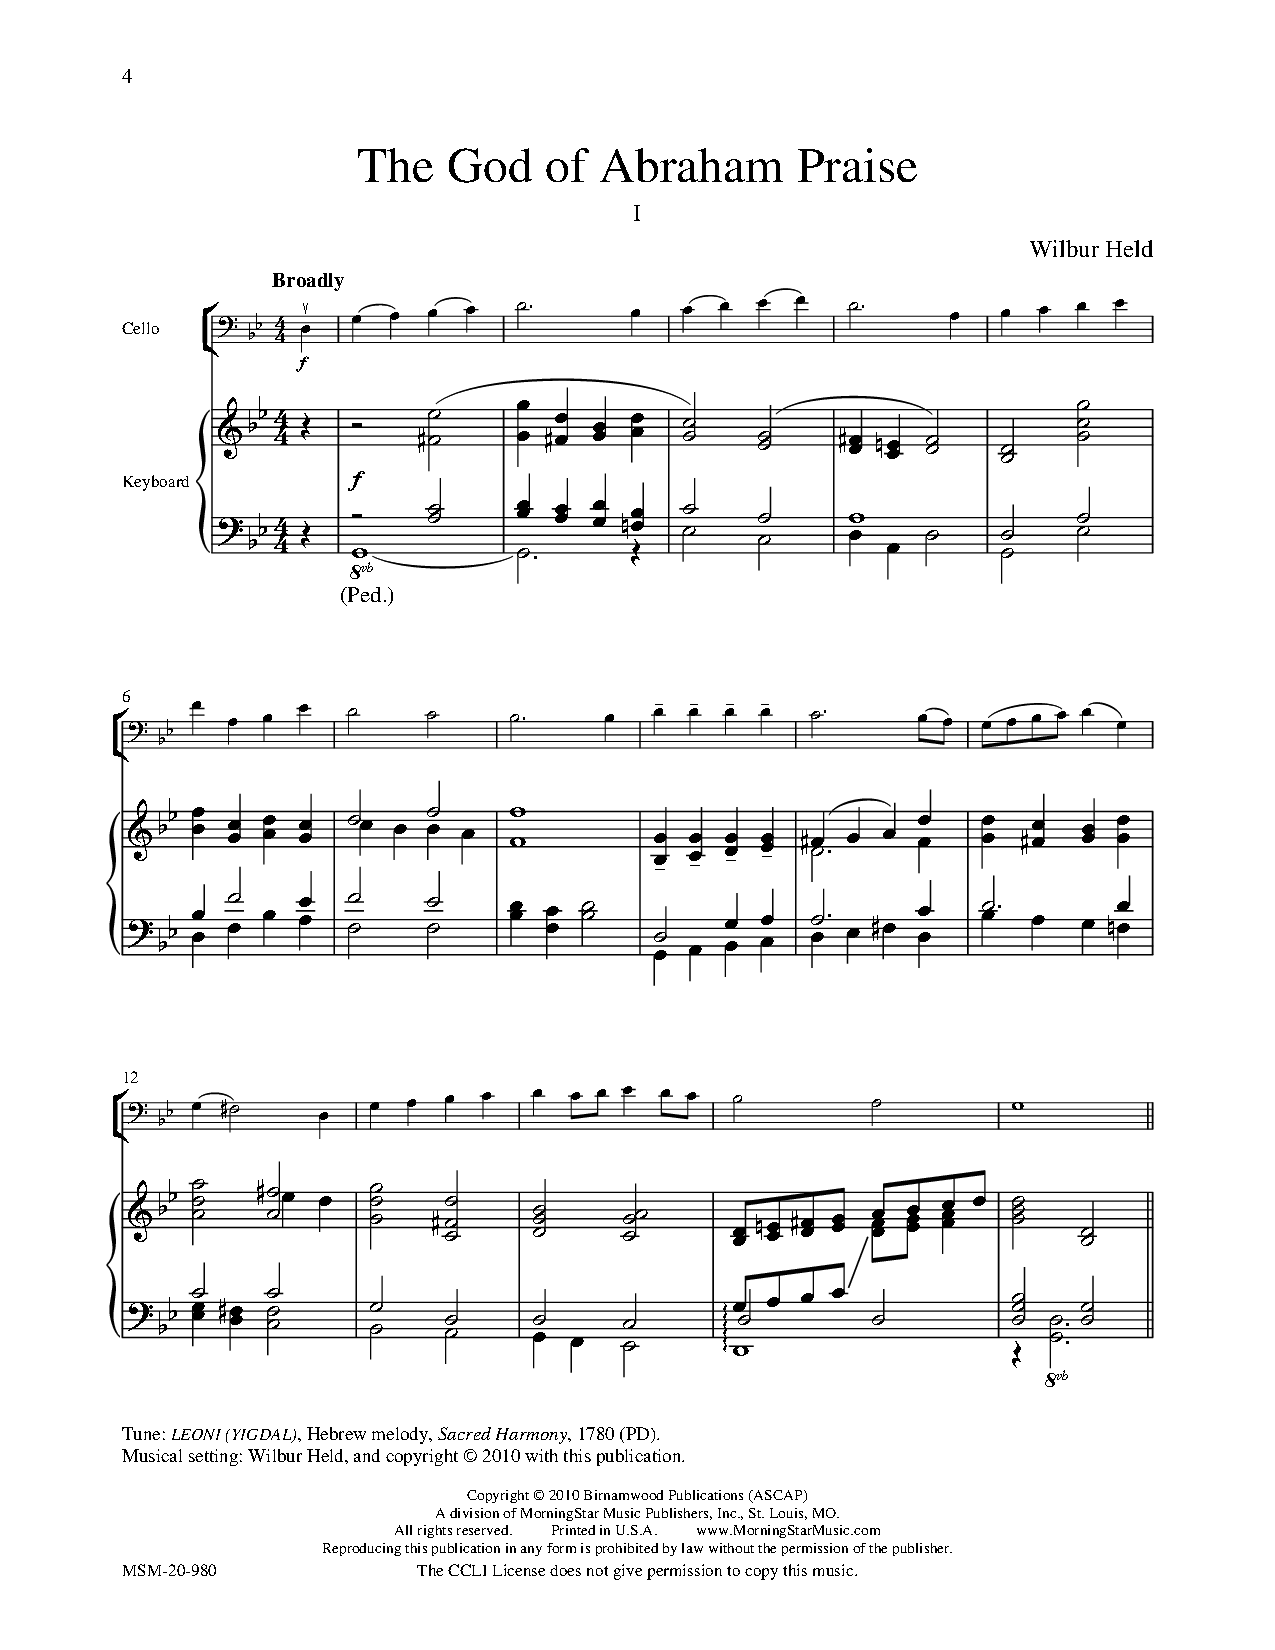 FIVE HYMN PRELUDES FOR CELLO AND KEYBOARD